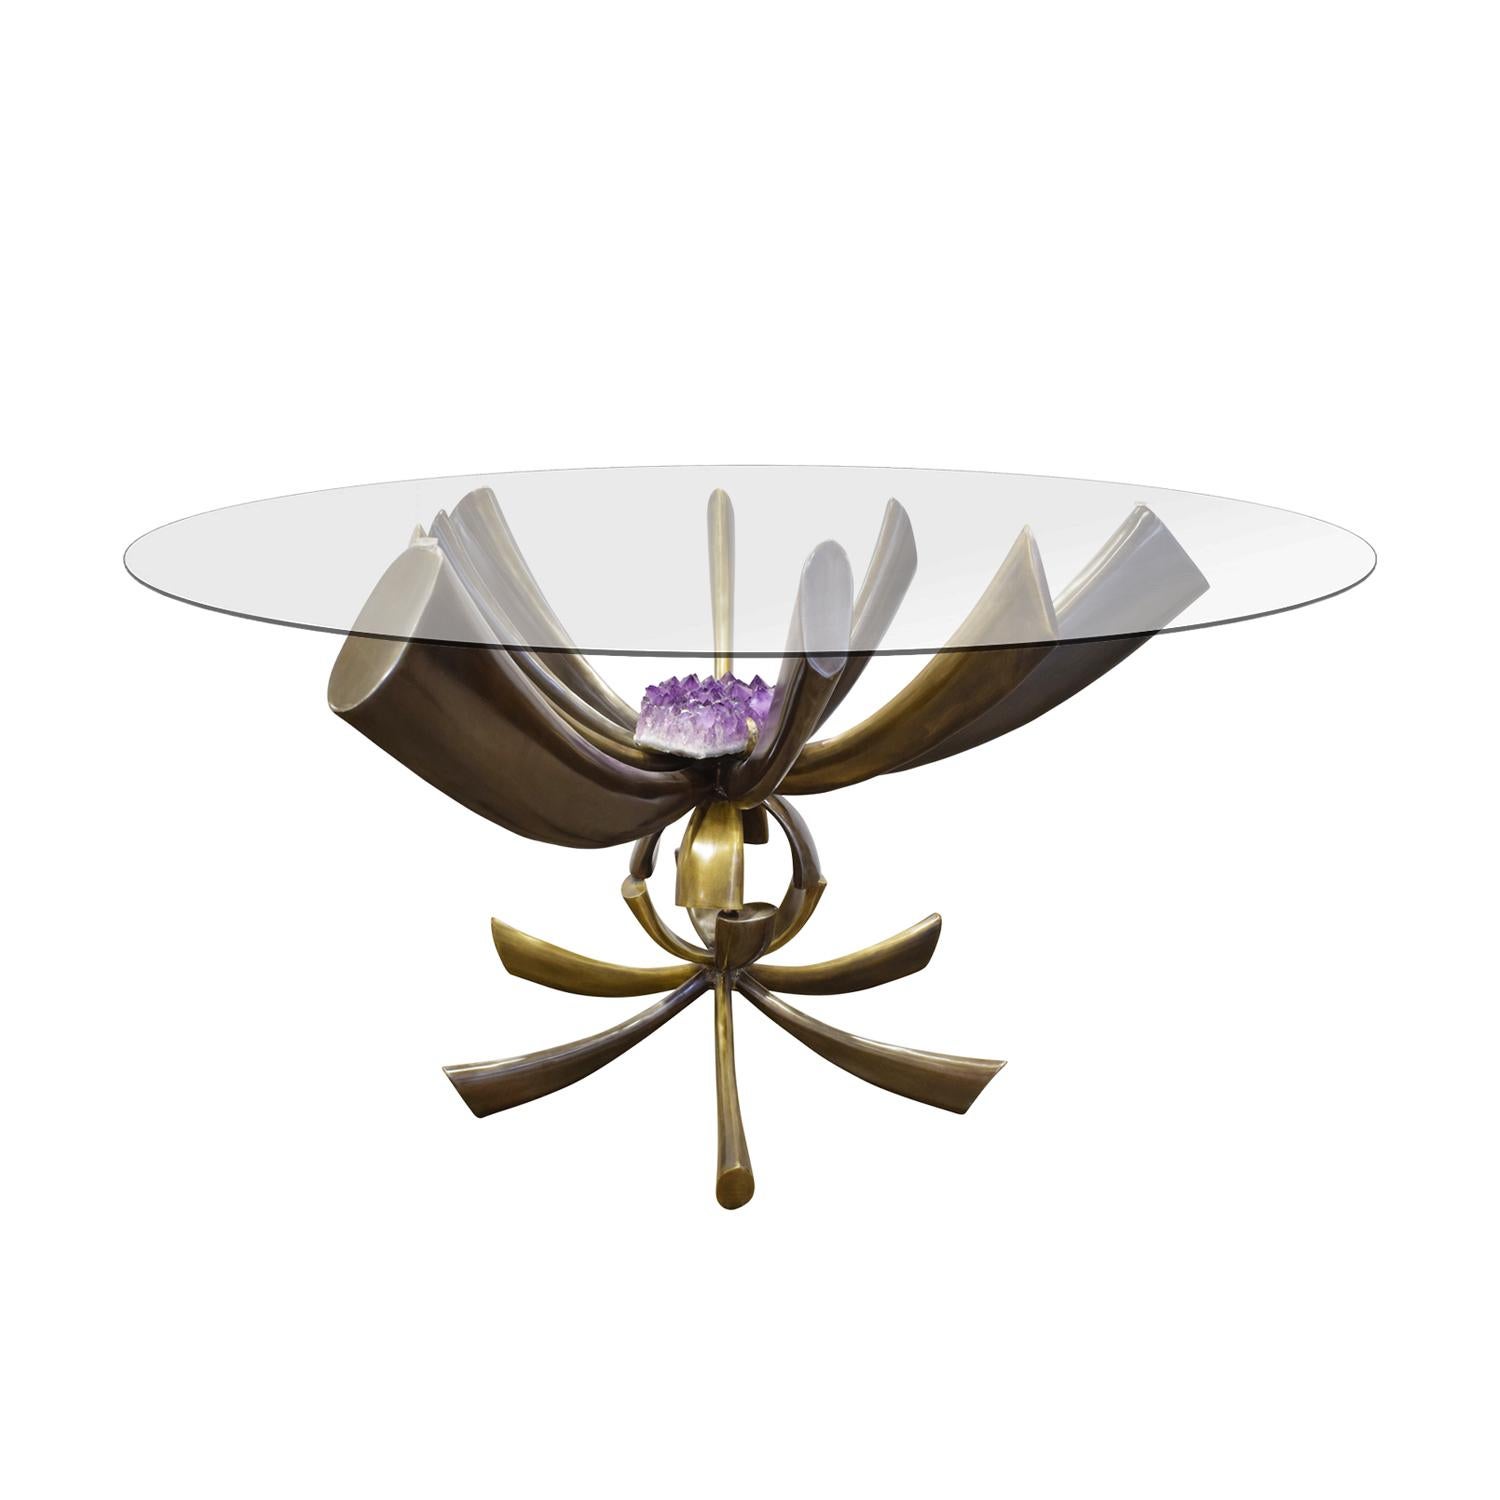 Rare and important entry/hall/dining table in bronze with large amethyst in jewelry setting mounted in center by Jacques Duval-Brasseur, France 1970s (signed with artist’s signature on base). Jacques Duval-Brasseur was a noted French sculptor and